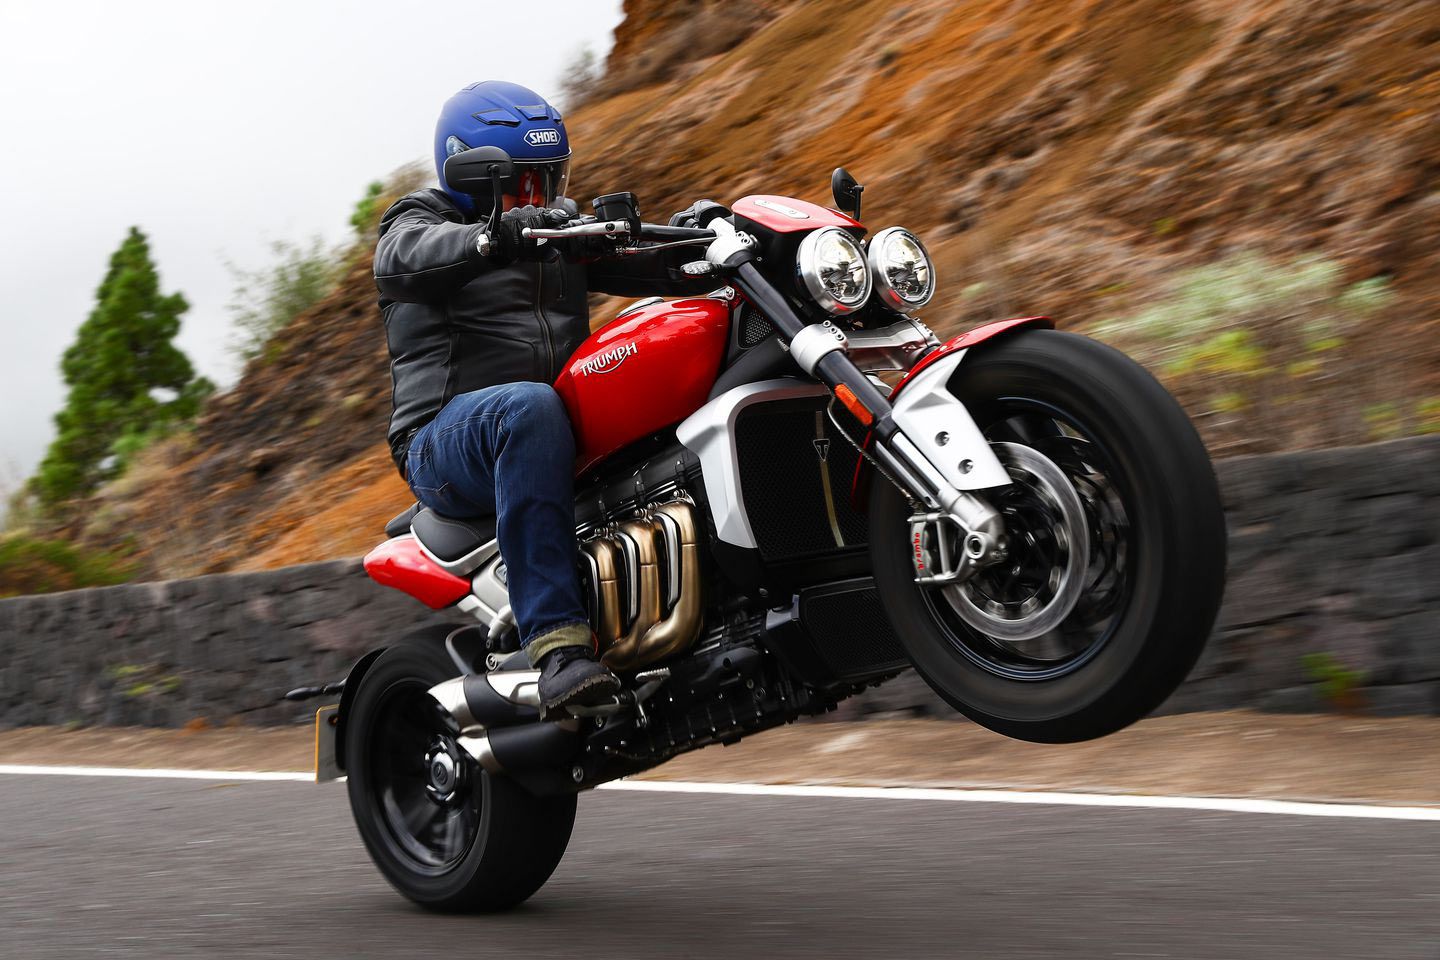 The Rocket 3’s 2,458cc triple is as entertaining as you might expect, as demonstrated by <i>Cycle World</i>’s first test aboard the 2020 model (shown here).